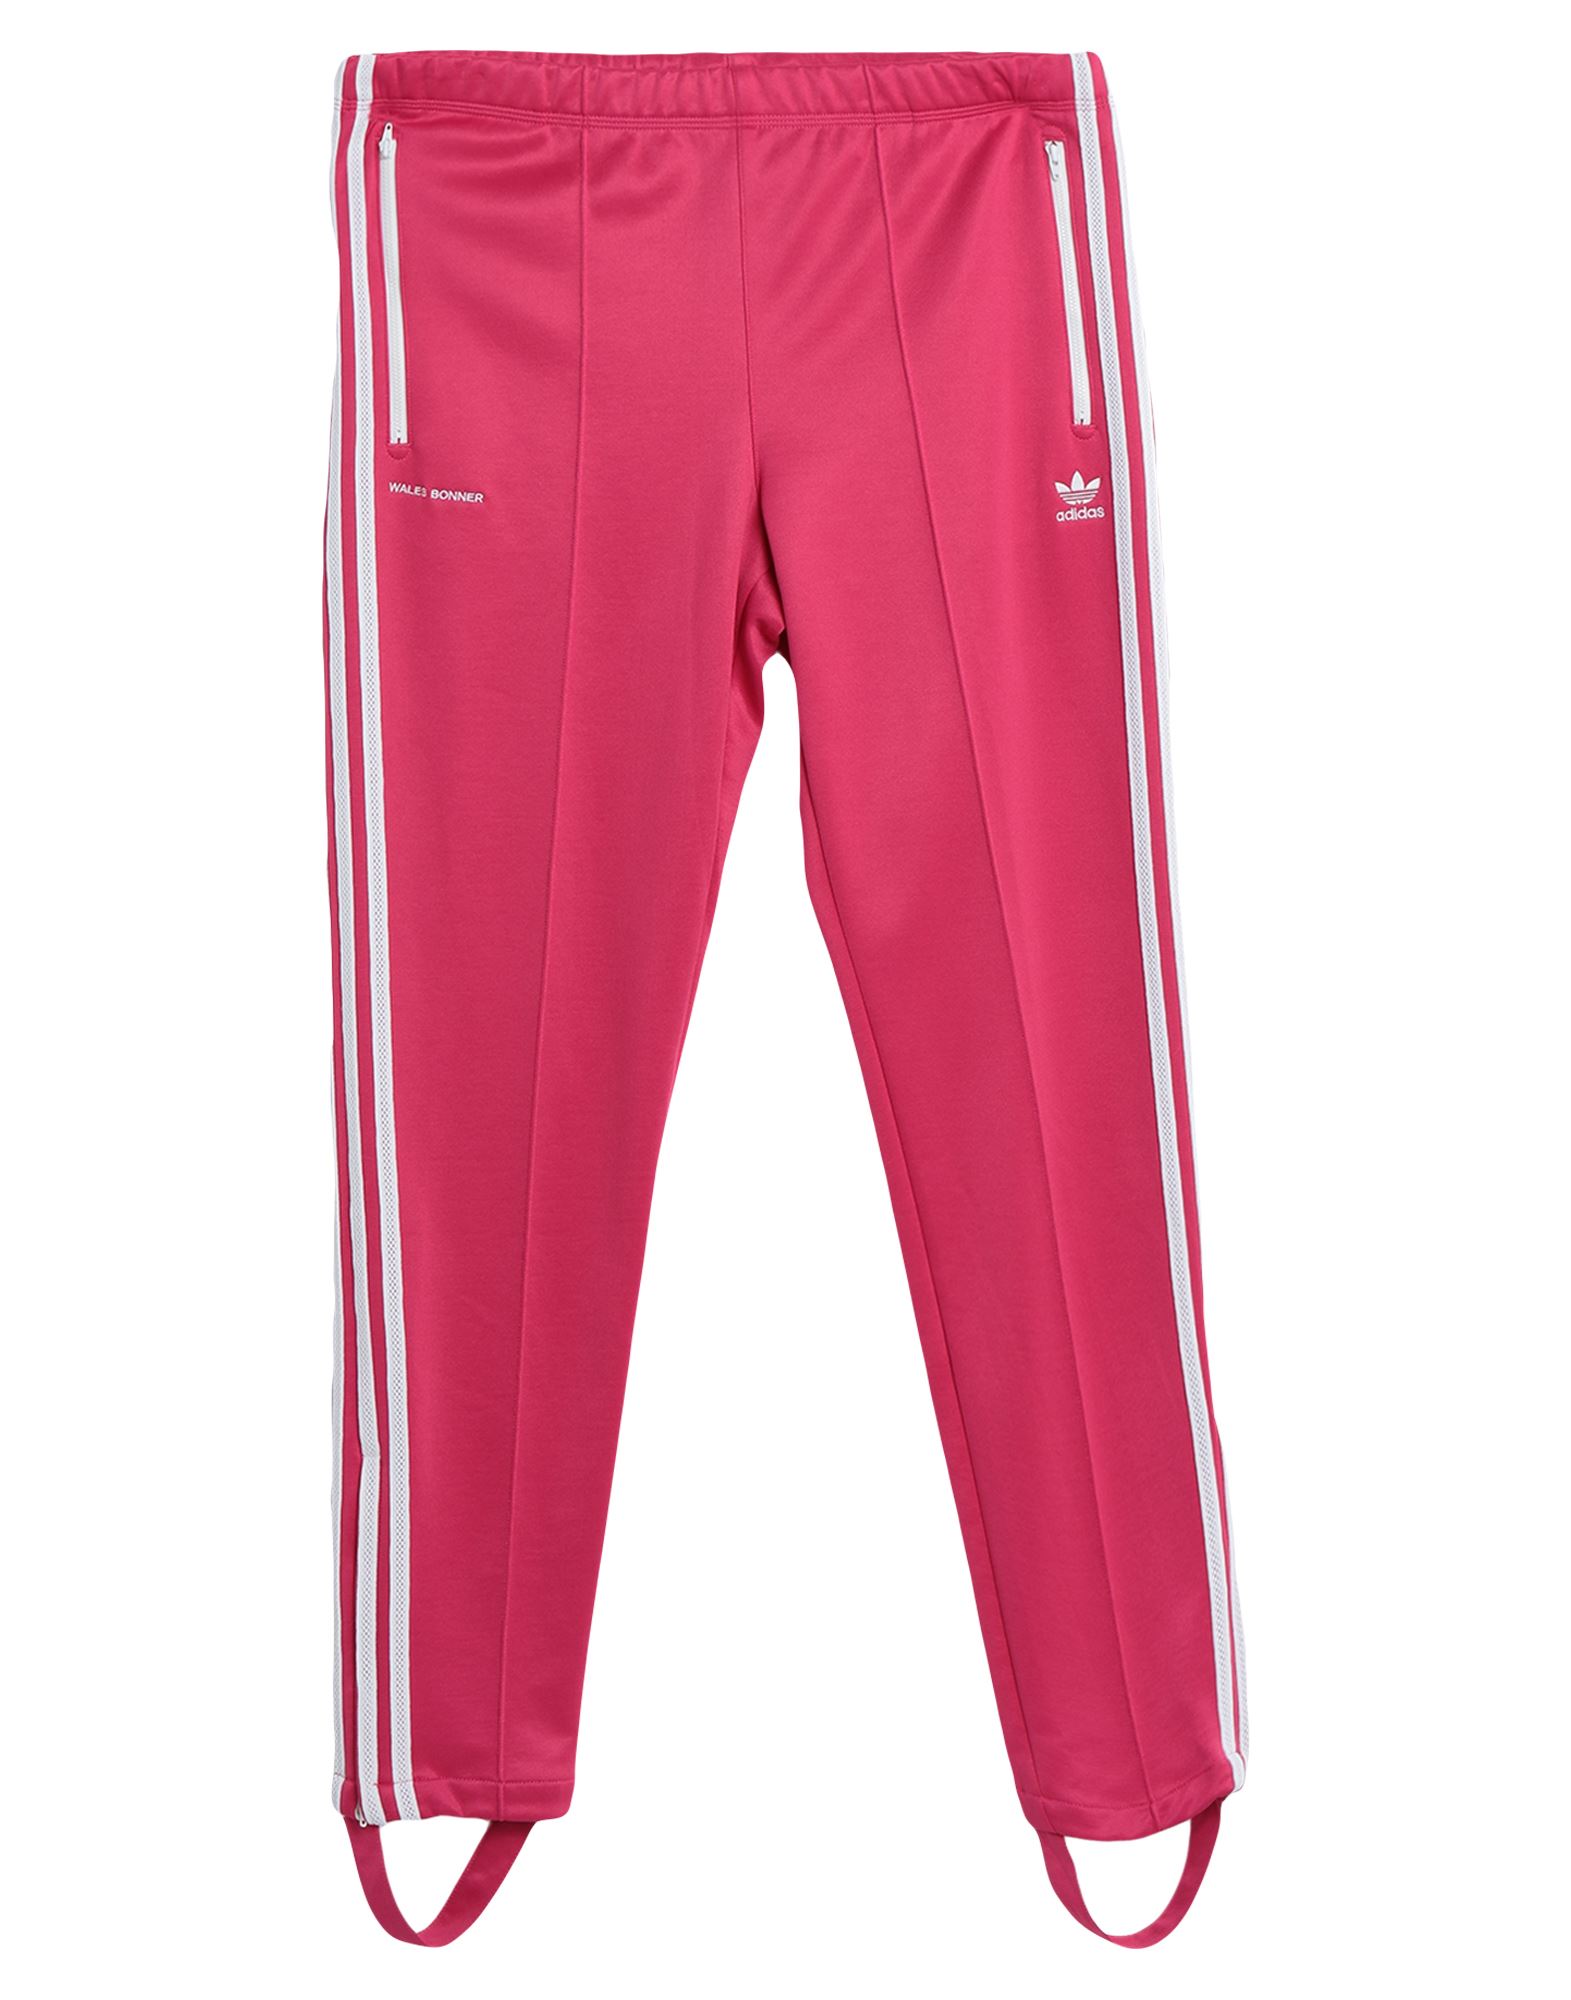 Adidas Originals By Wales Bonner Pants In Fuchsia